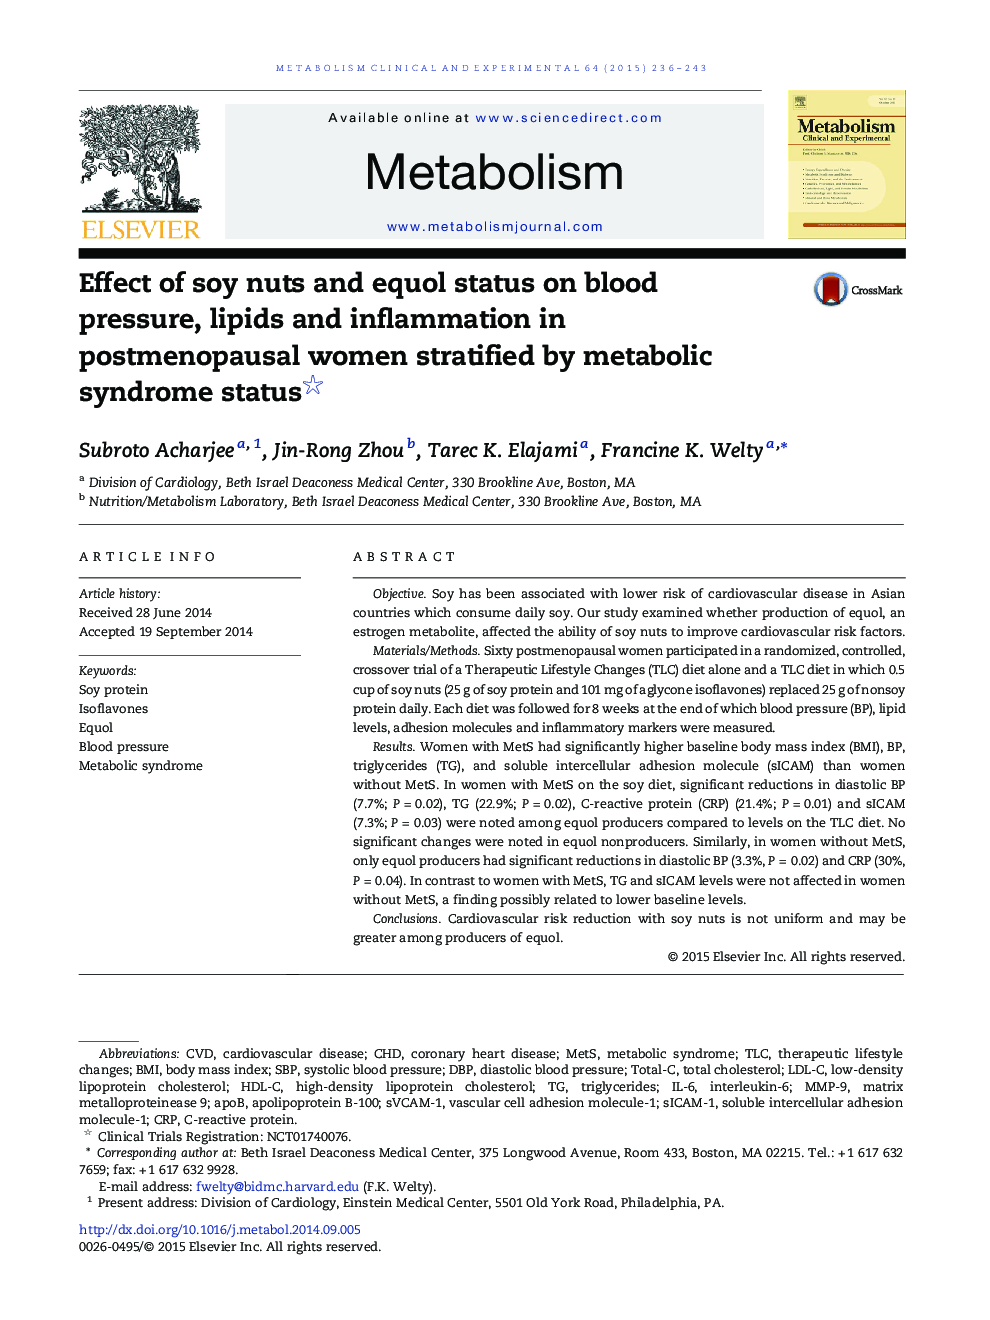 Effect of soy nuts and equol status on blood pressure, lipids and inflammation in postmenopausal women stratified by metabolic syndrome status